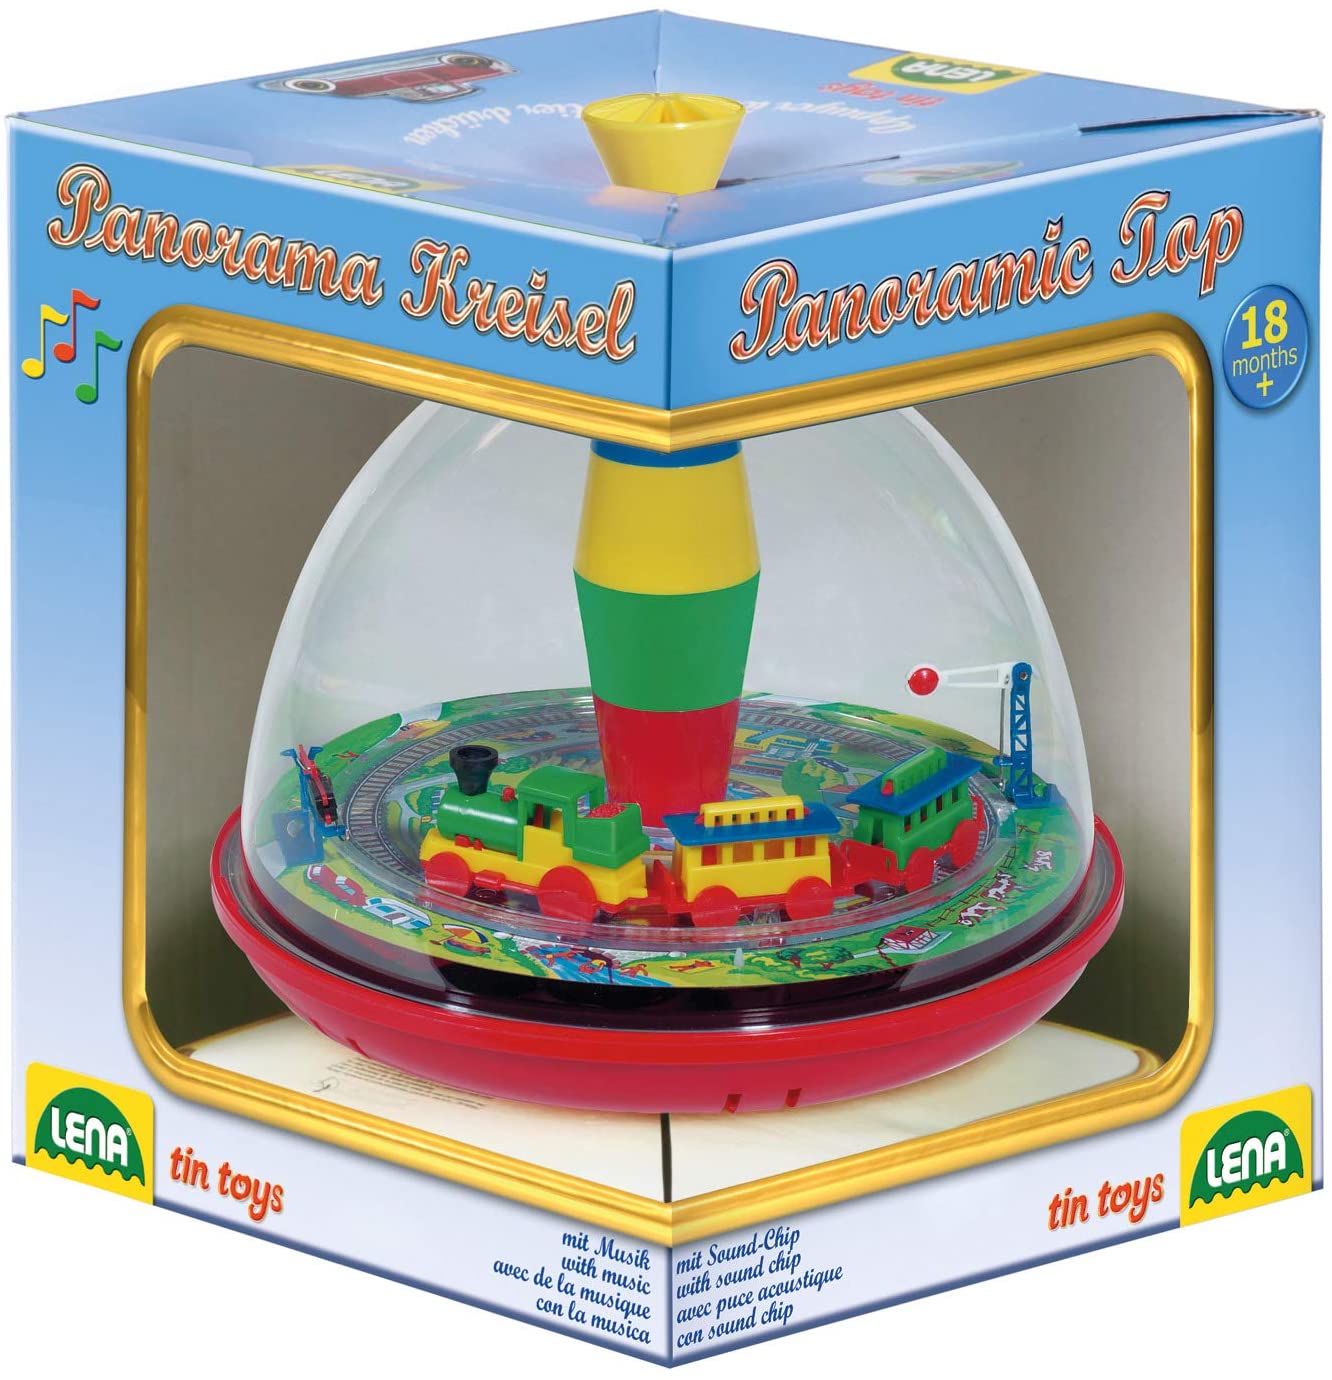 railway noise SIMM Spielwaren Bolz 52120 panorama spinning top with sound chip